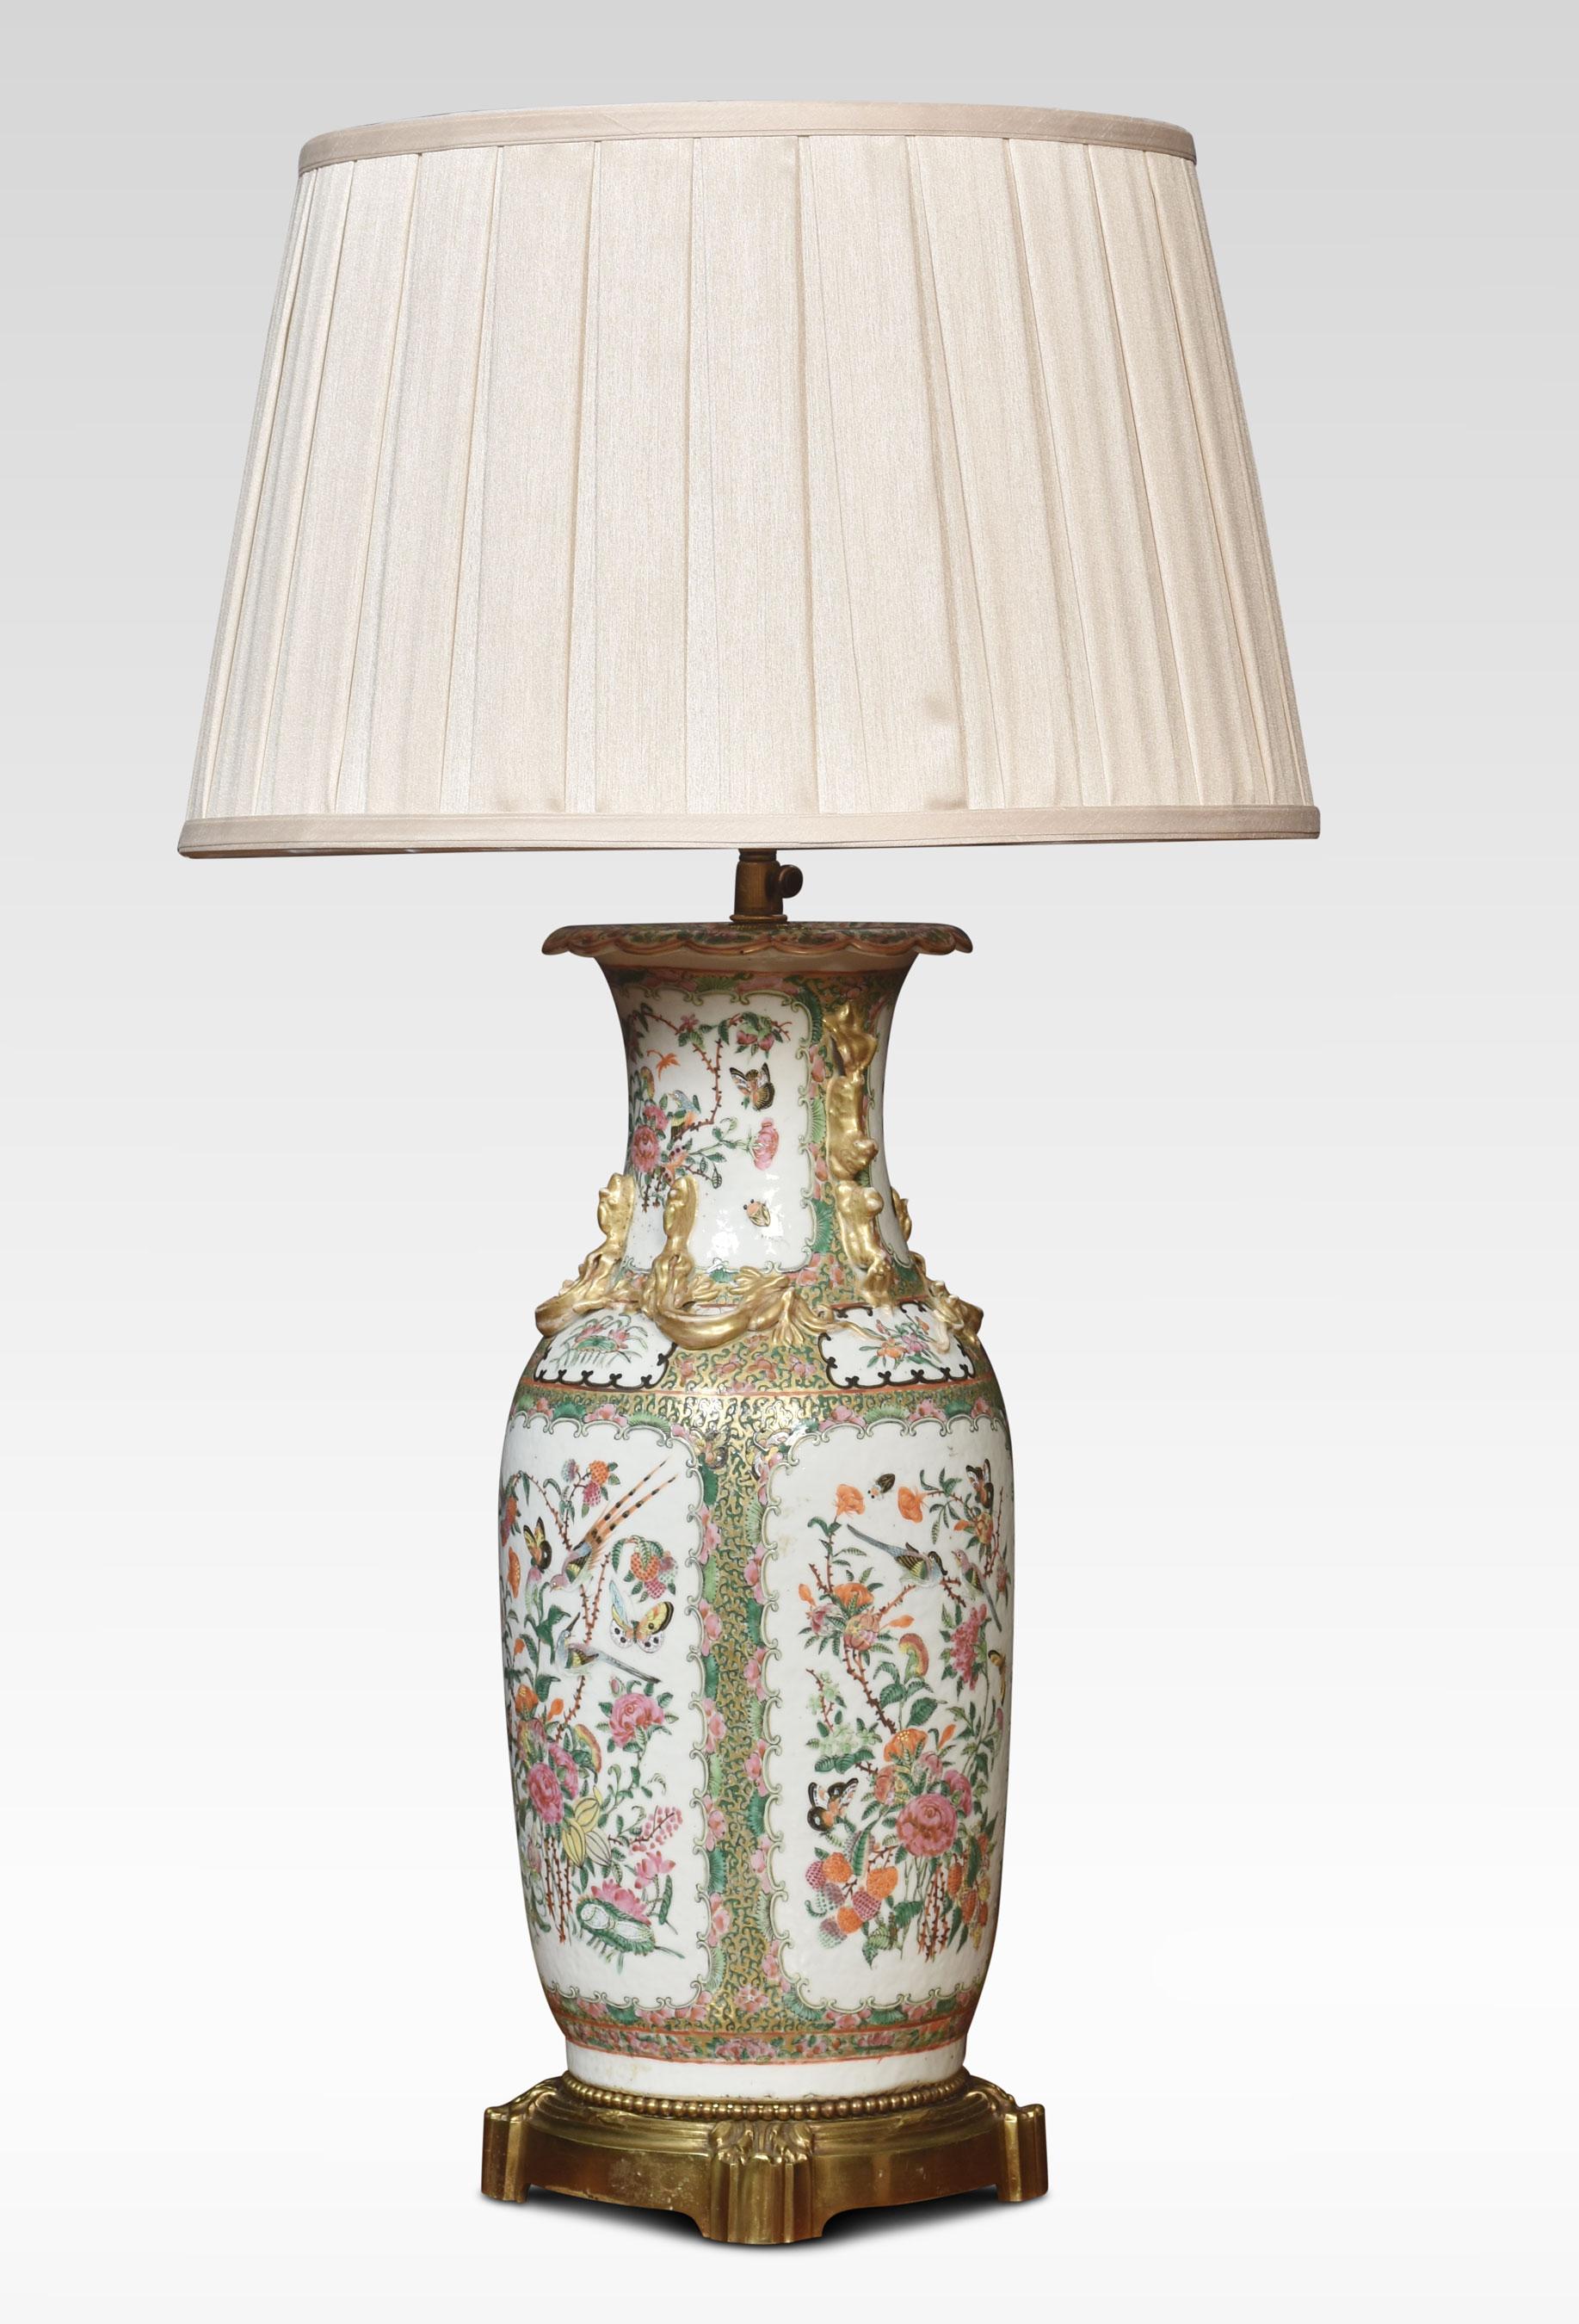 Chinese canton famille rose porcelain vase lamp, decorated with panels of birds, butterflies and native flora, the neck with moulded Chilong and lion dog handles. Converted for electricity.
Dimensions
Height 23 Inches adjustable to 35.5